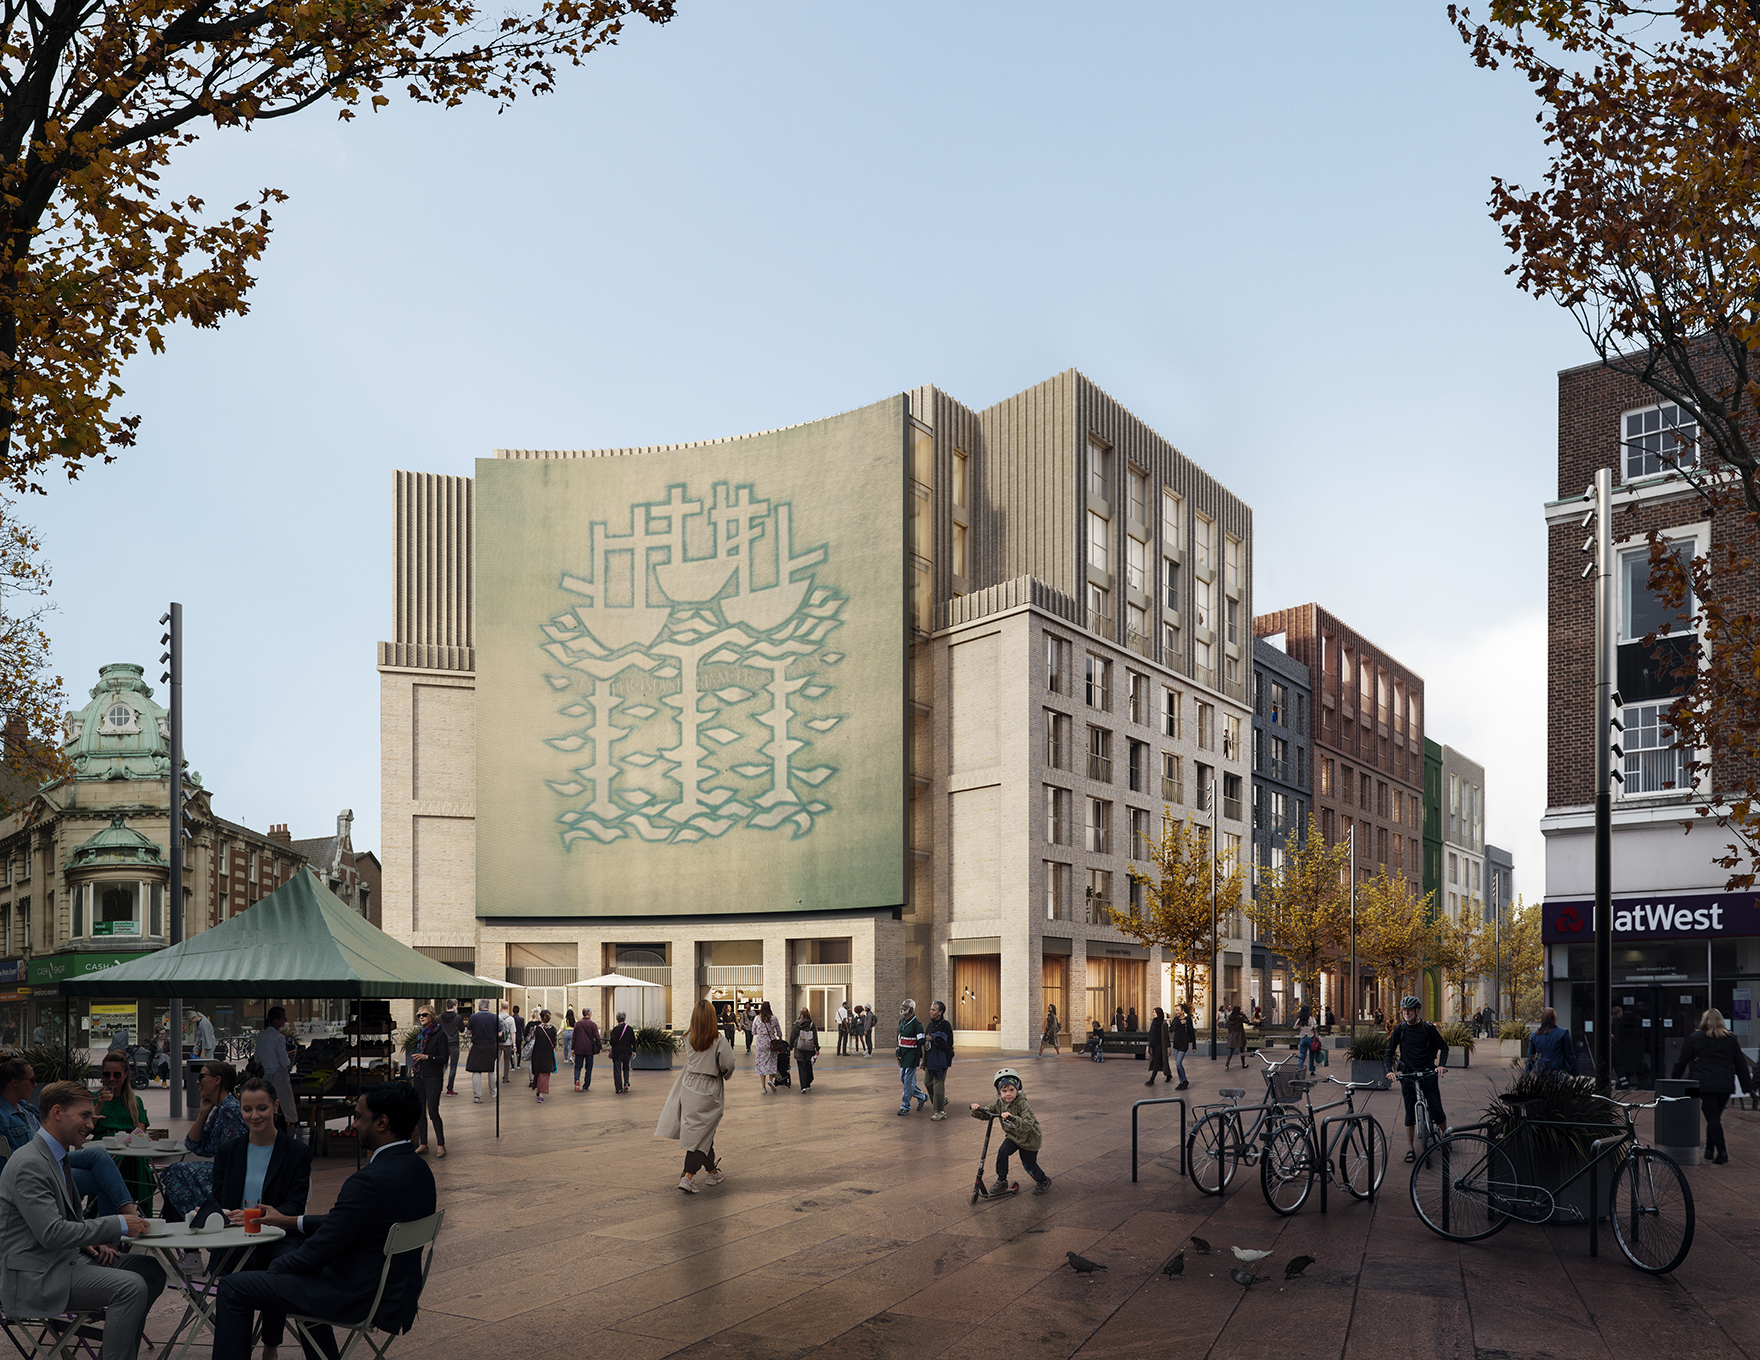 Albion Square Development Hull Planning Approval Three Ships Mural Faulknerbrowns Architects L